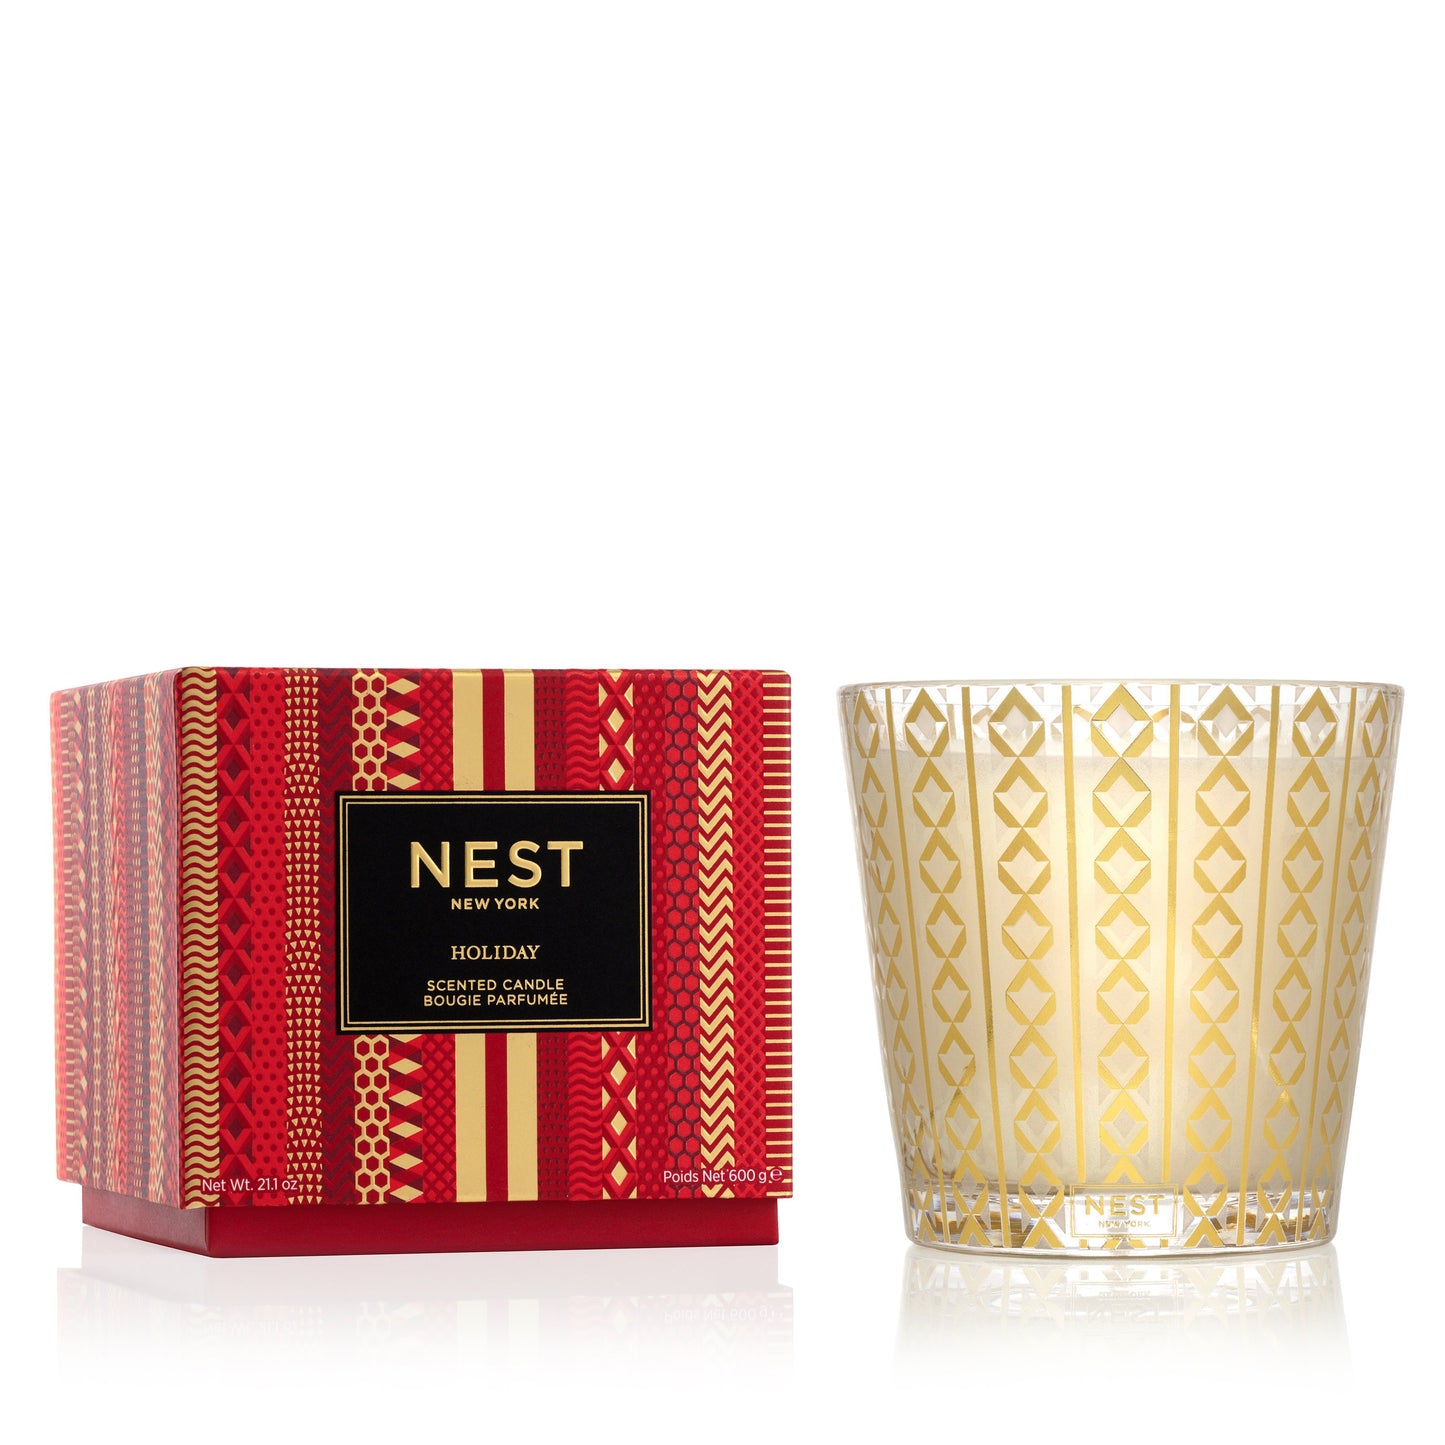 Nest 3-Wick Candle 21.1oz Candles in Holiday at Wrapsody